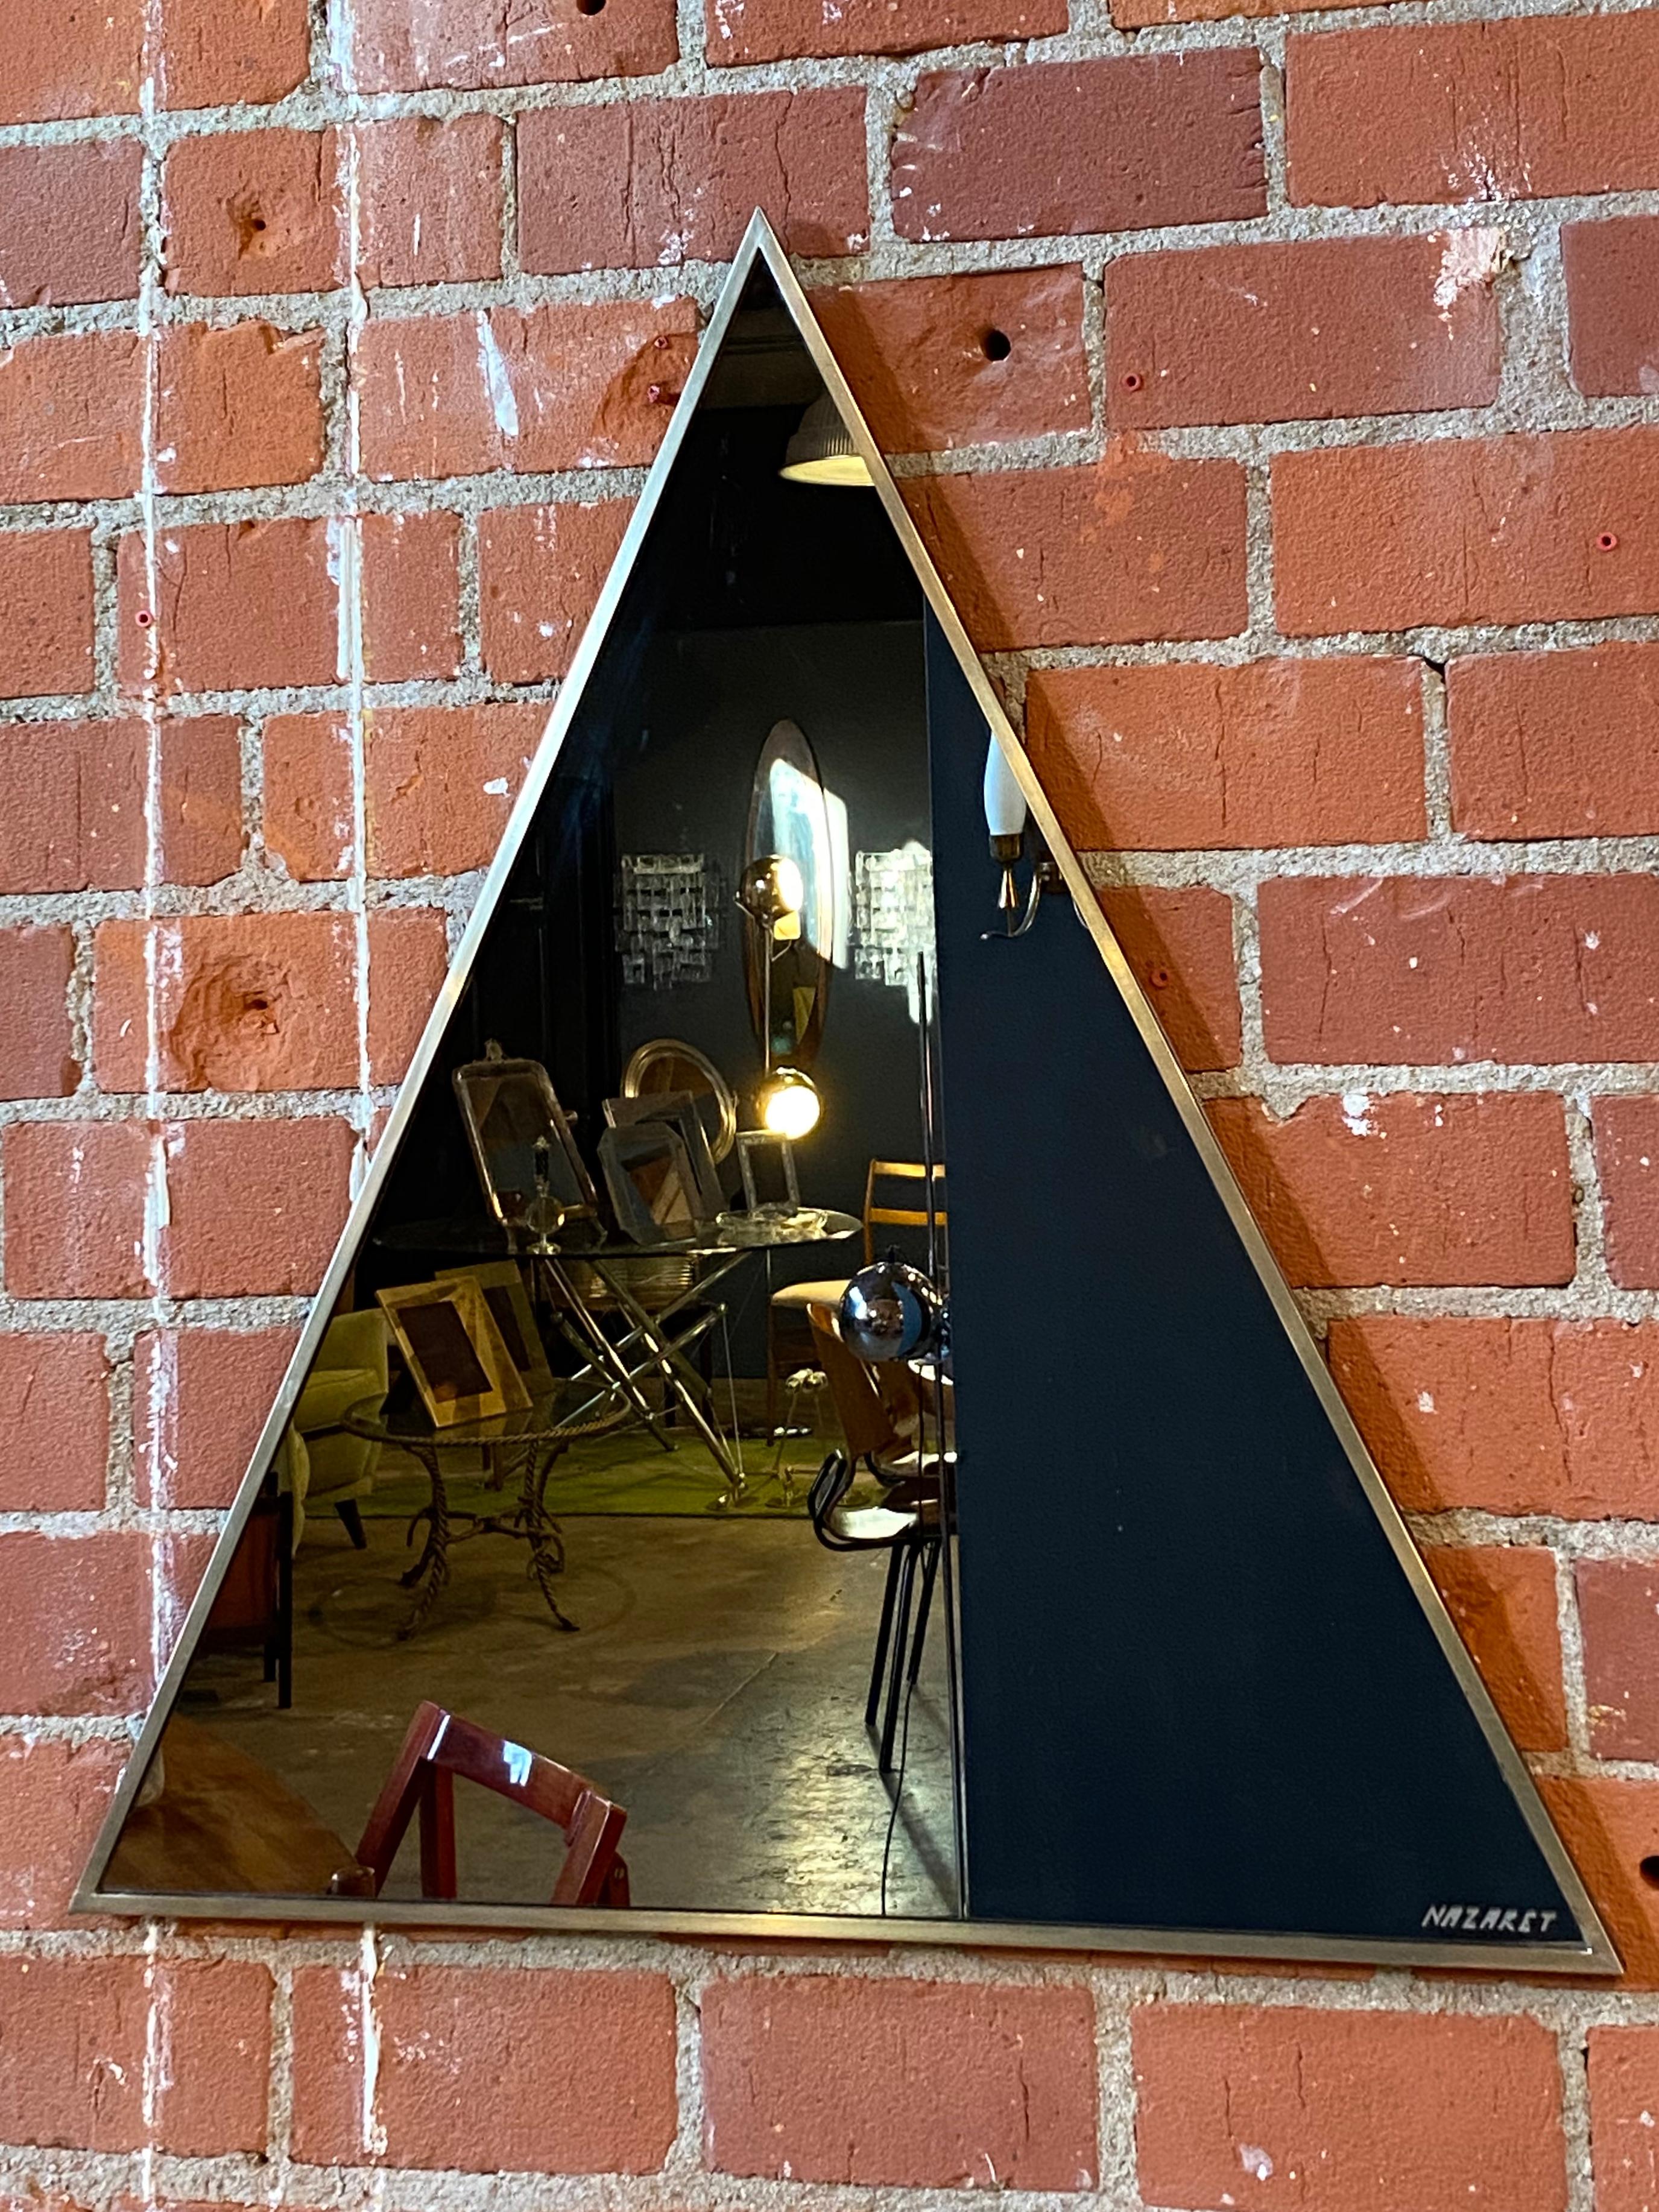 Large triangular steel framed wall mirror, by the Italian designer Romeo Rega for Nazaret, Italy, 1970s.
Rega’s furniture is characterized by geometric shapes and reduced forms.
His designs are almost always gilded, chromed, or brass-plated, which